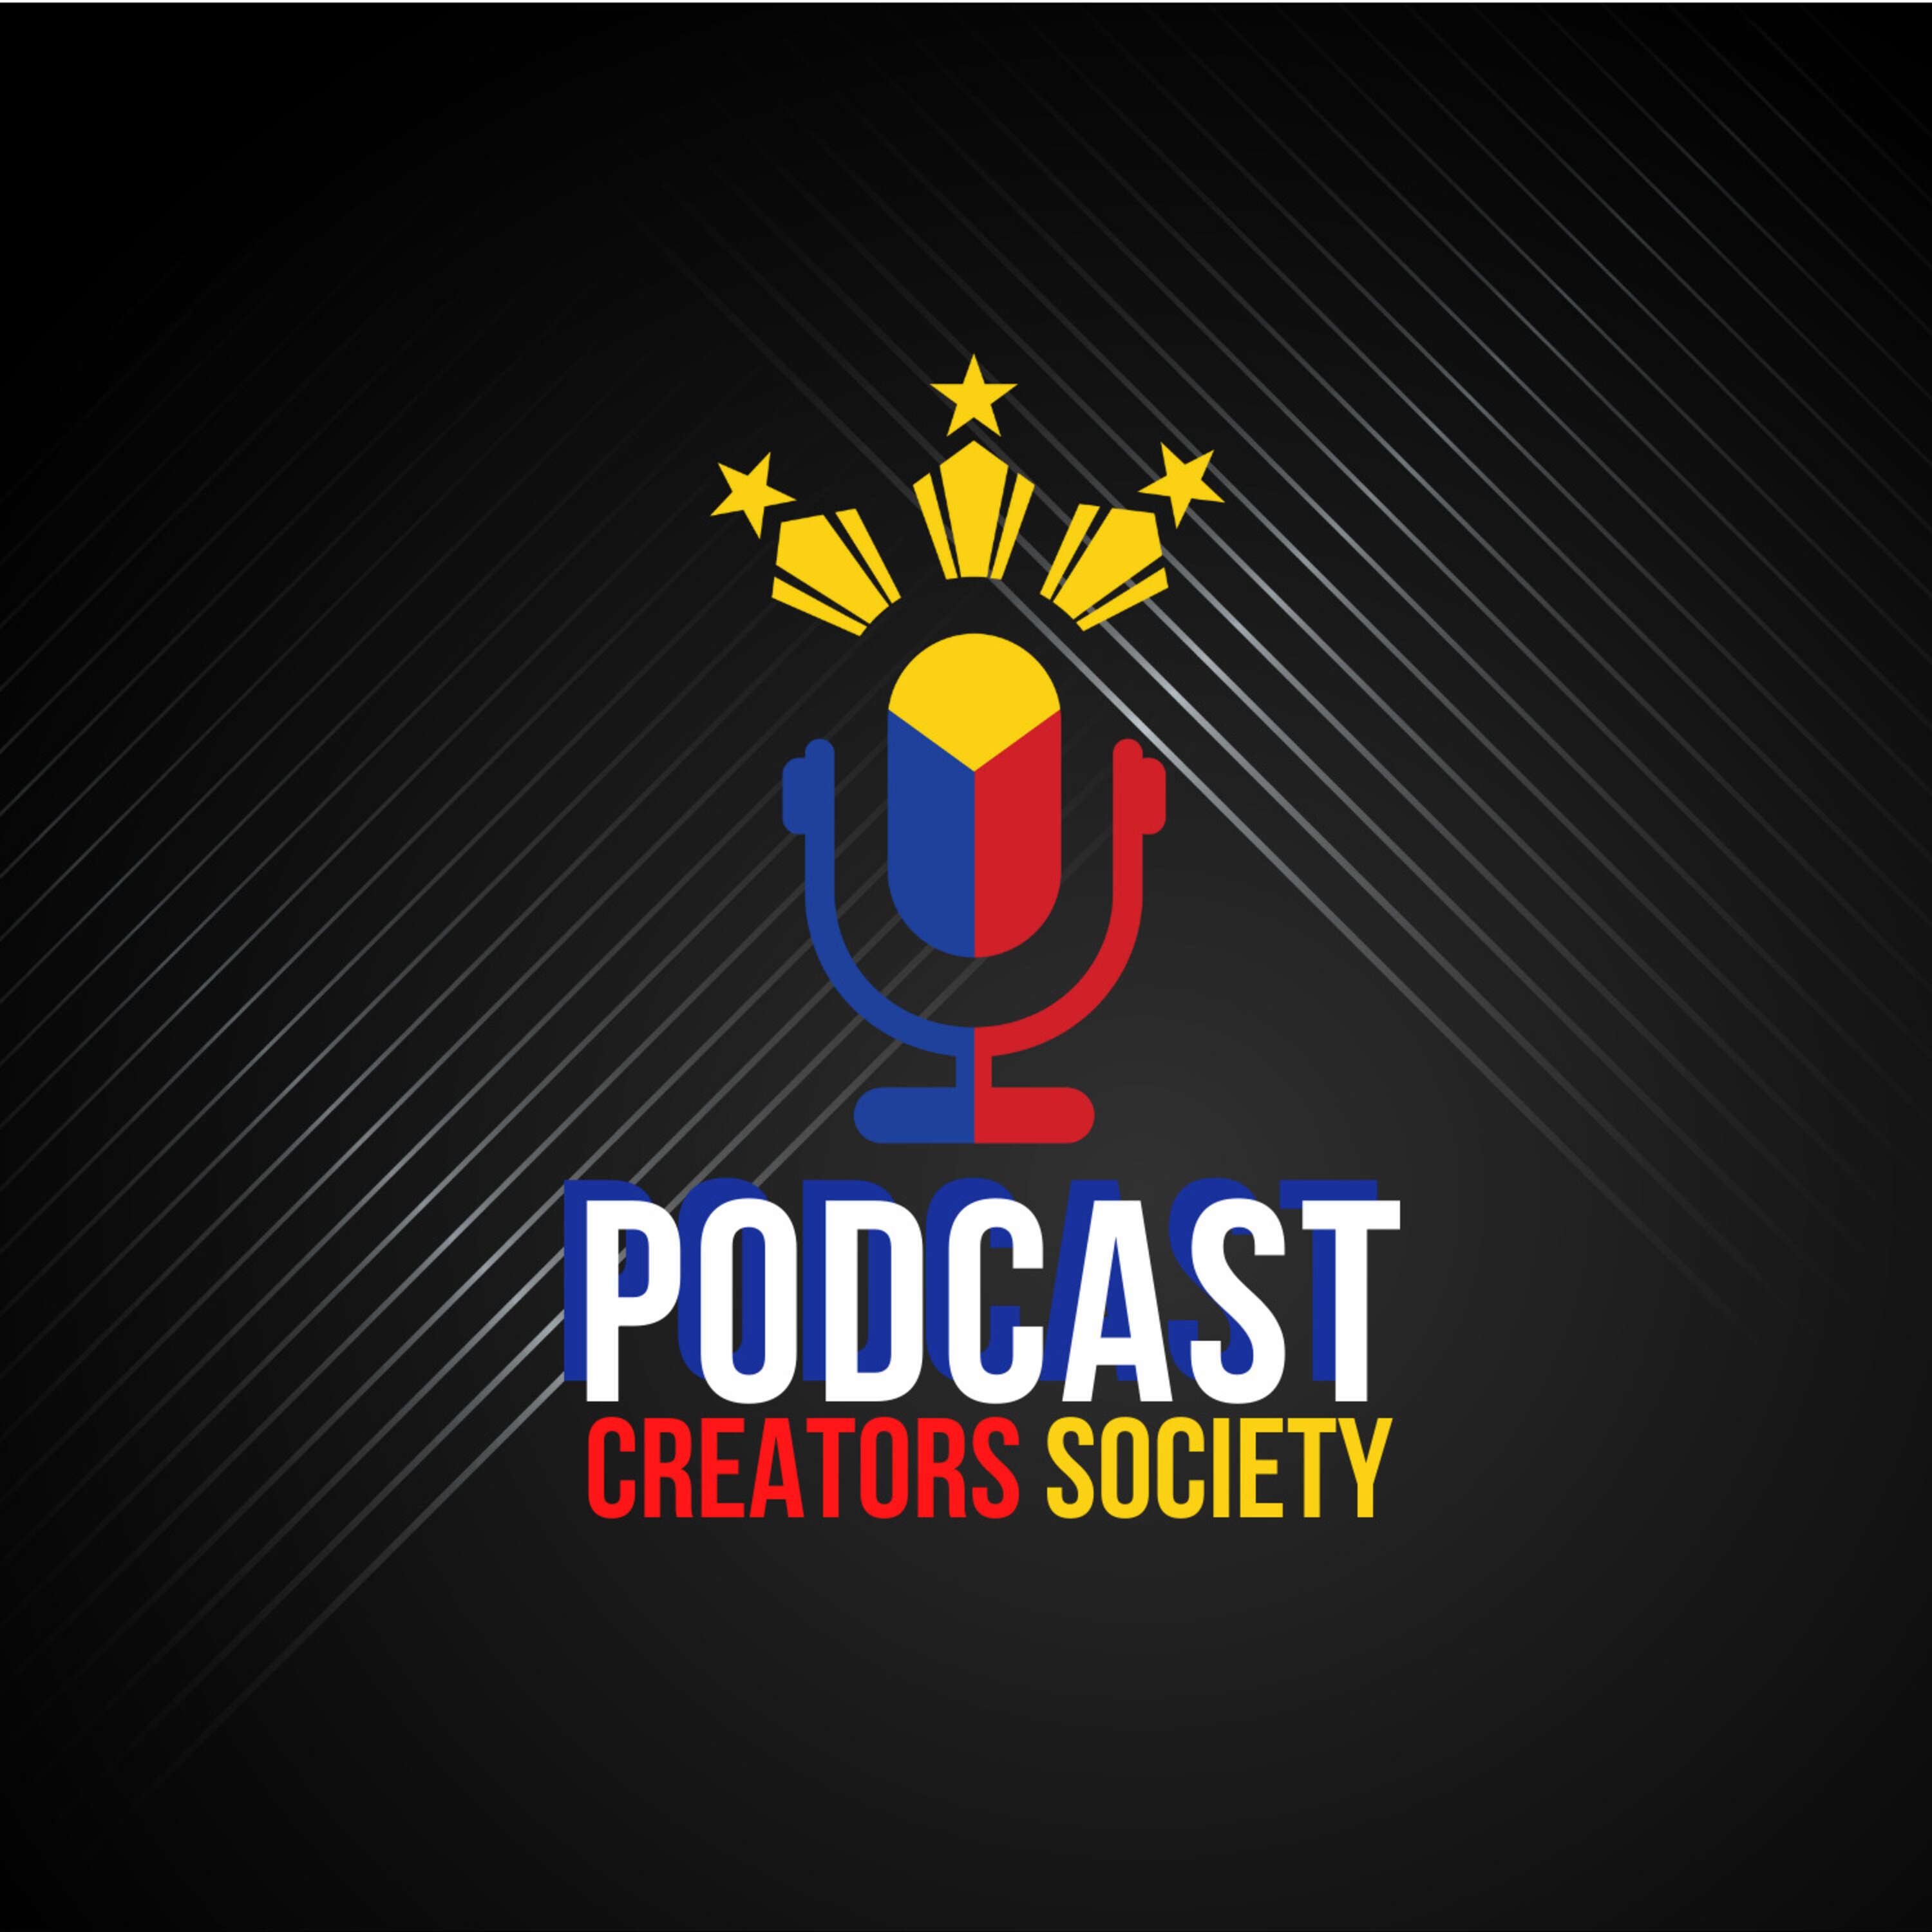 Welcome to Podcast Creators Society